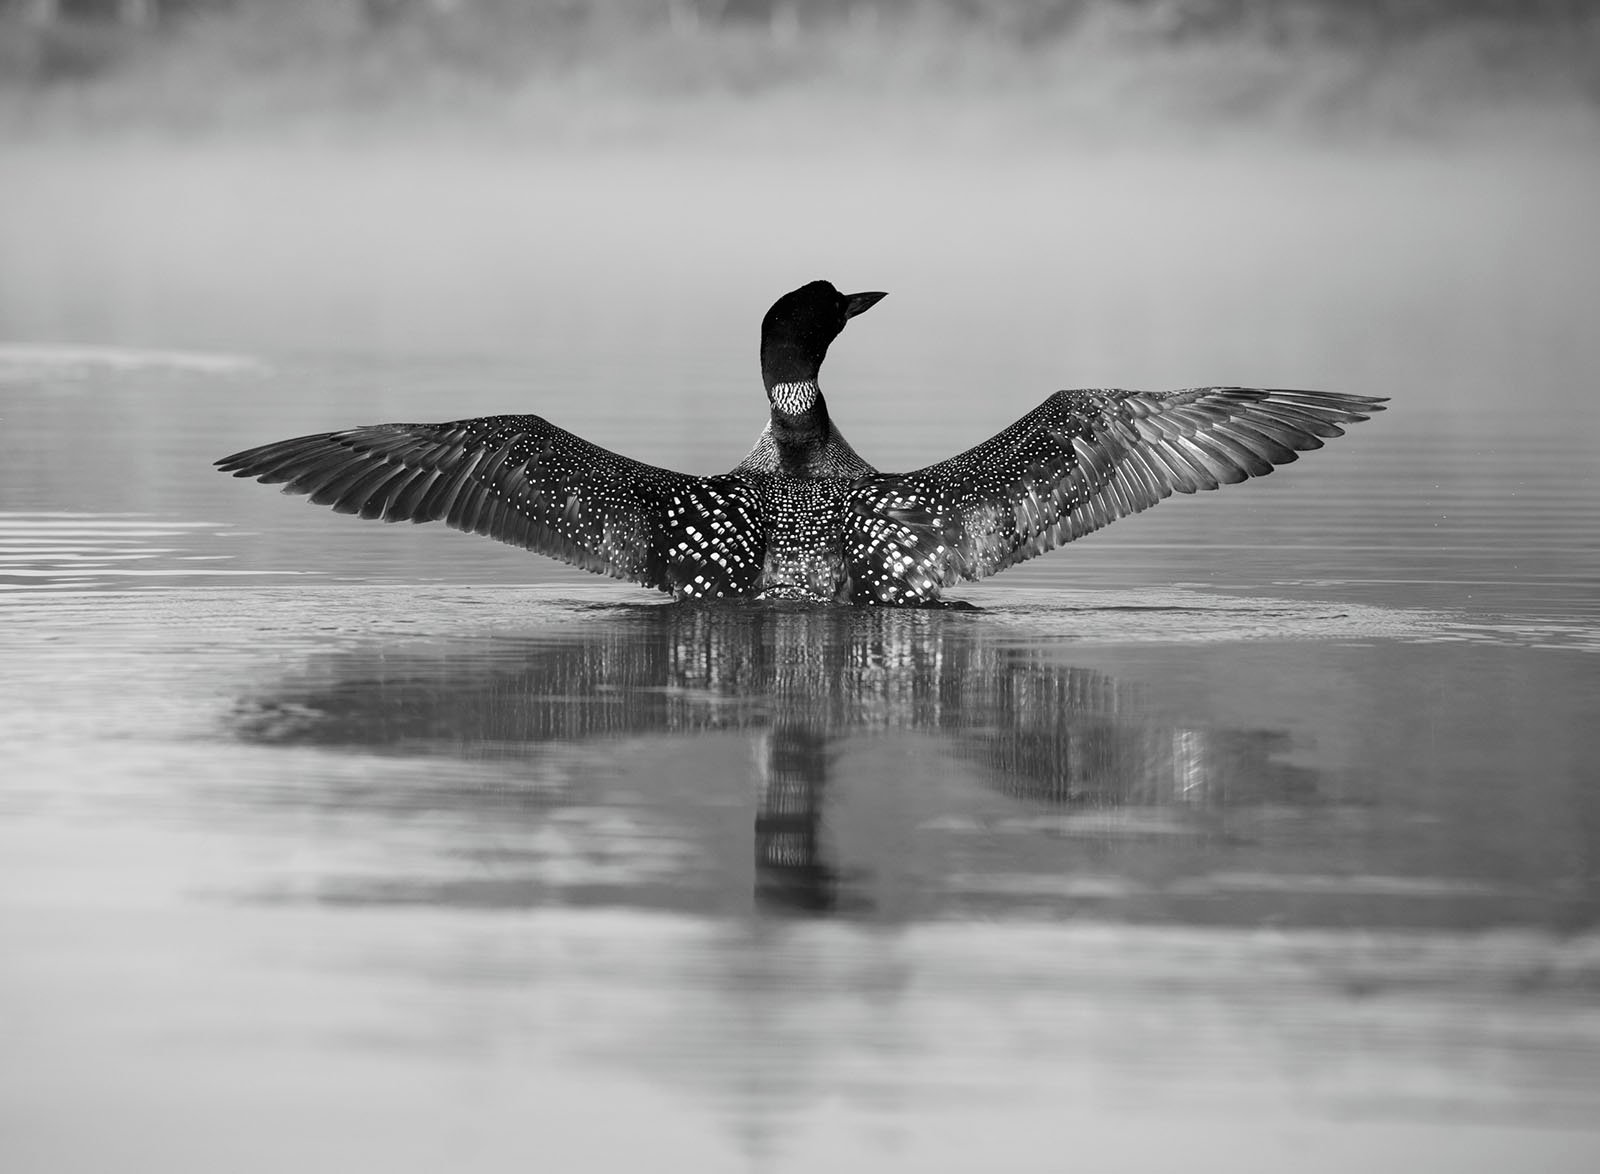 A black-and-white image of a loon spreading its wings wide while floating on a misty lake, creating a perfect reflection on the calm water.